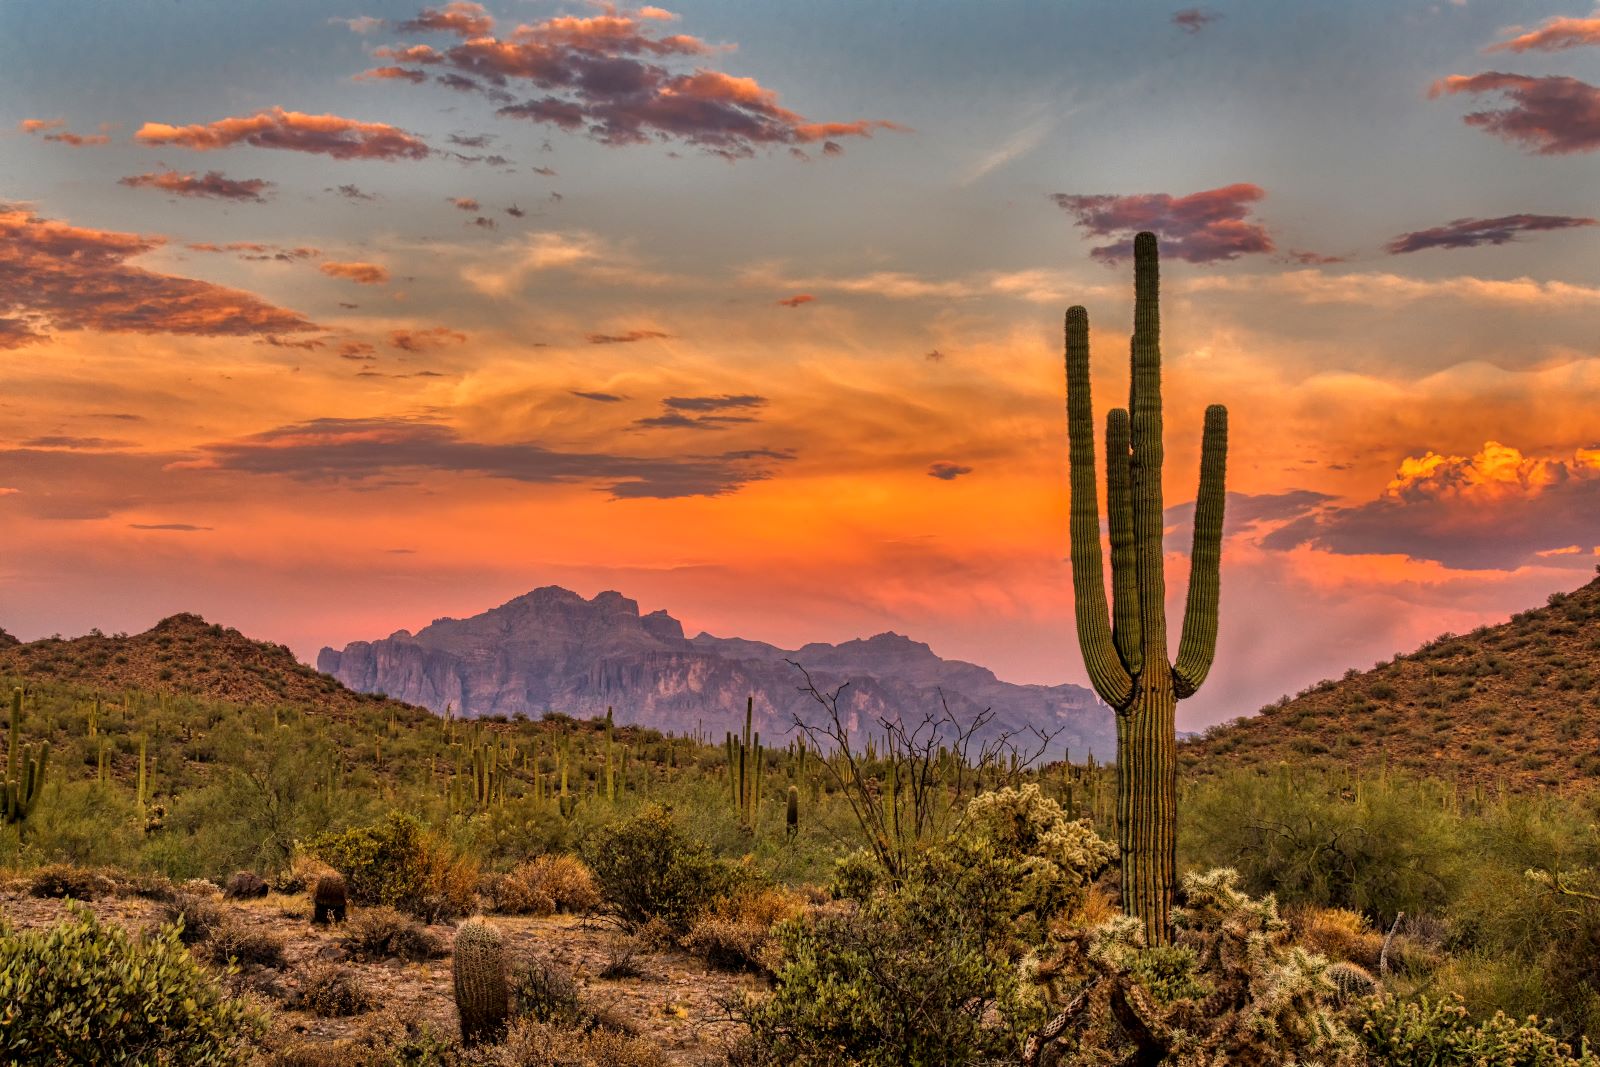 Image credit: Shutterstock / Brent Coulter <p>Explore the desert landscape and cultural heritage of Tucson. Expect to spend around $50 a day.</p>